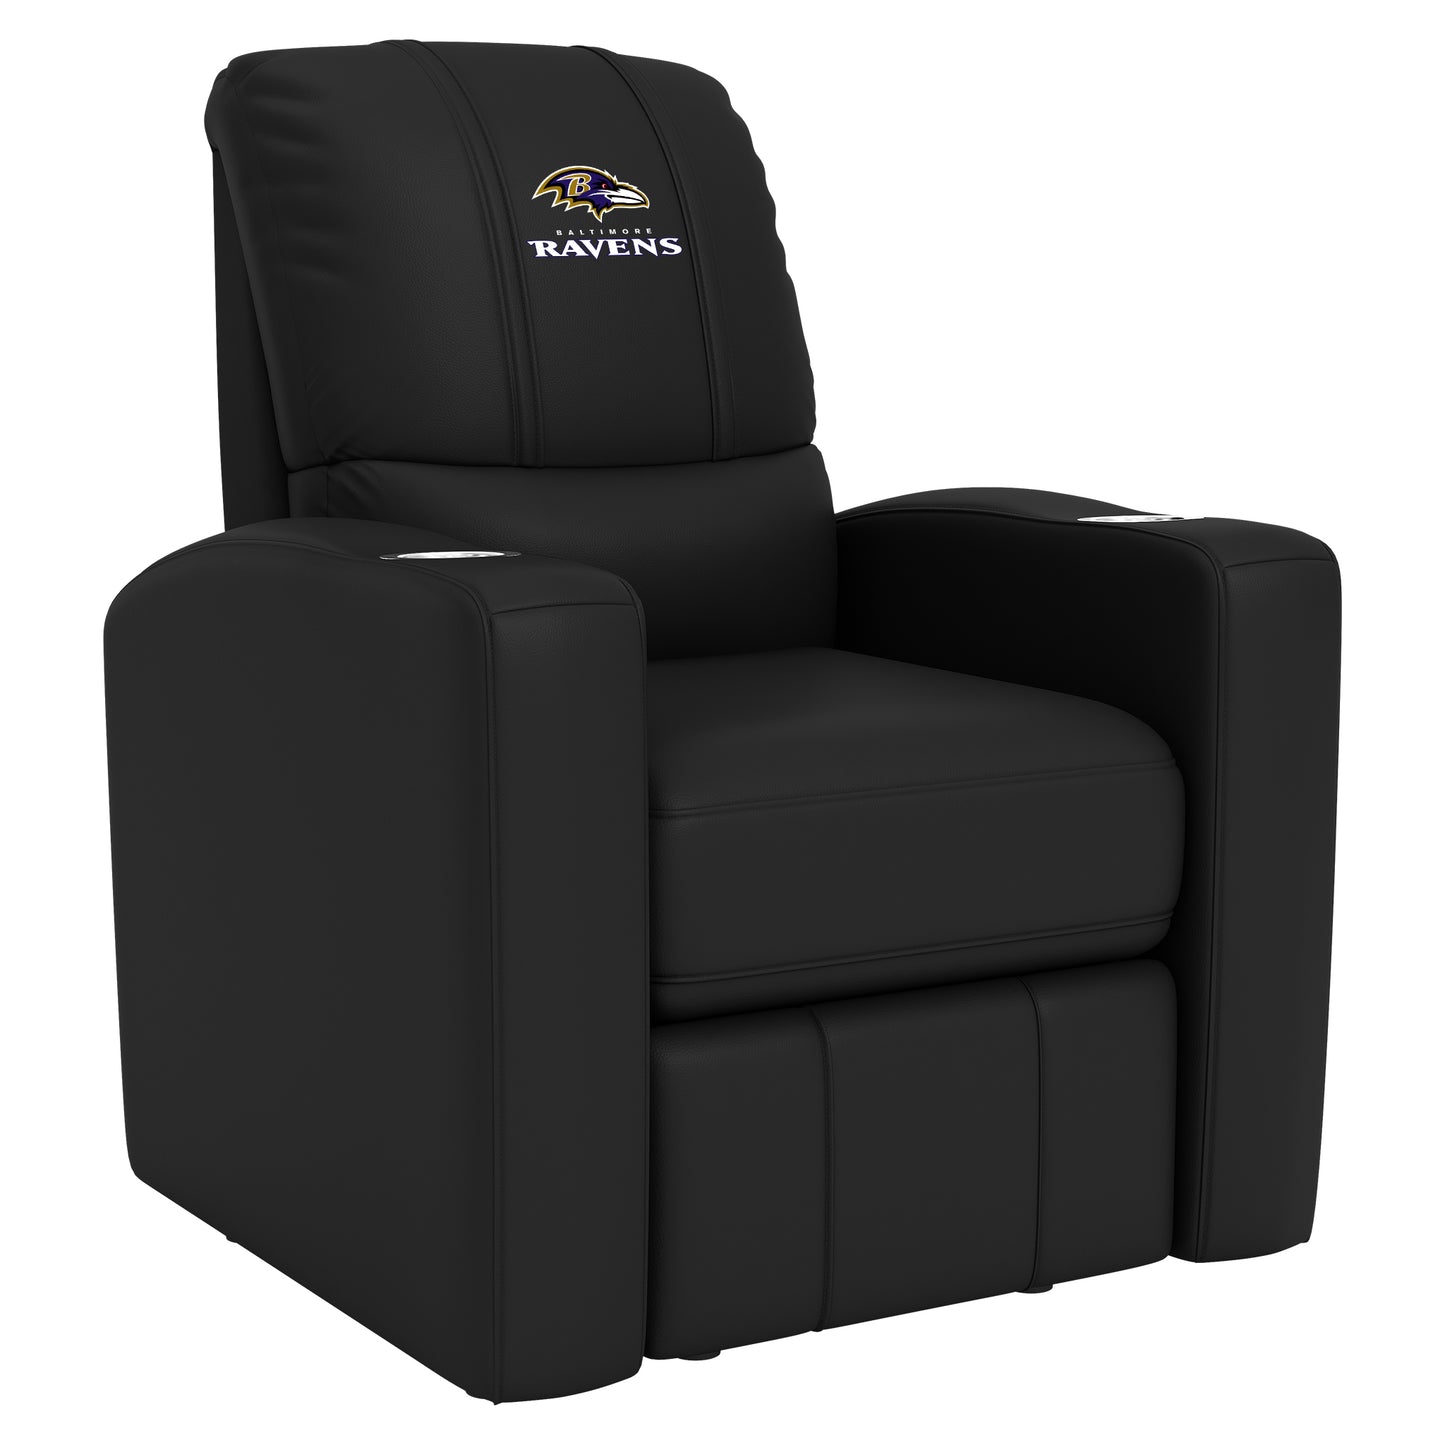 Stealth Recliner with Baltimore Ravens Secondary Logo